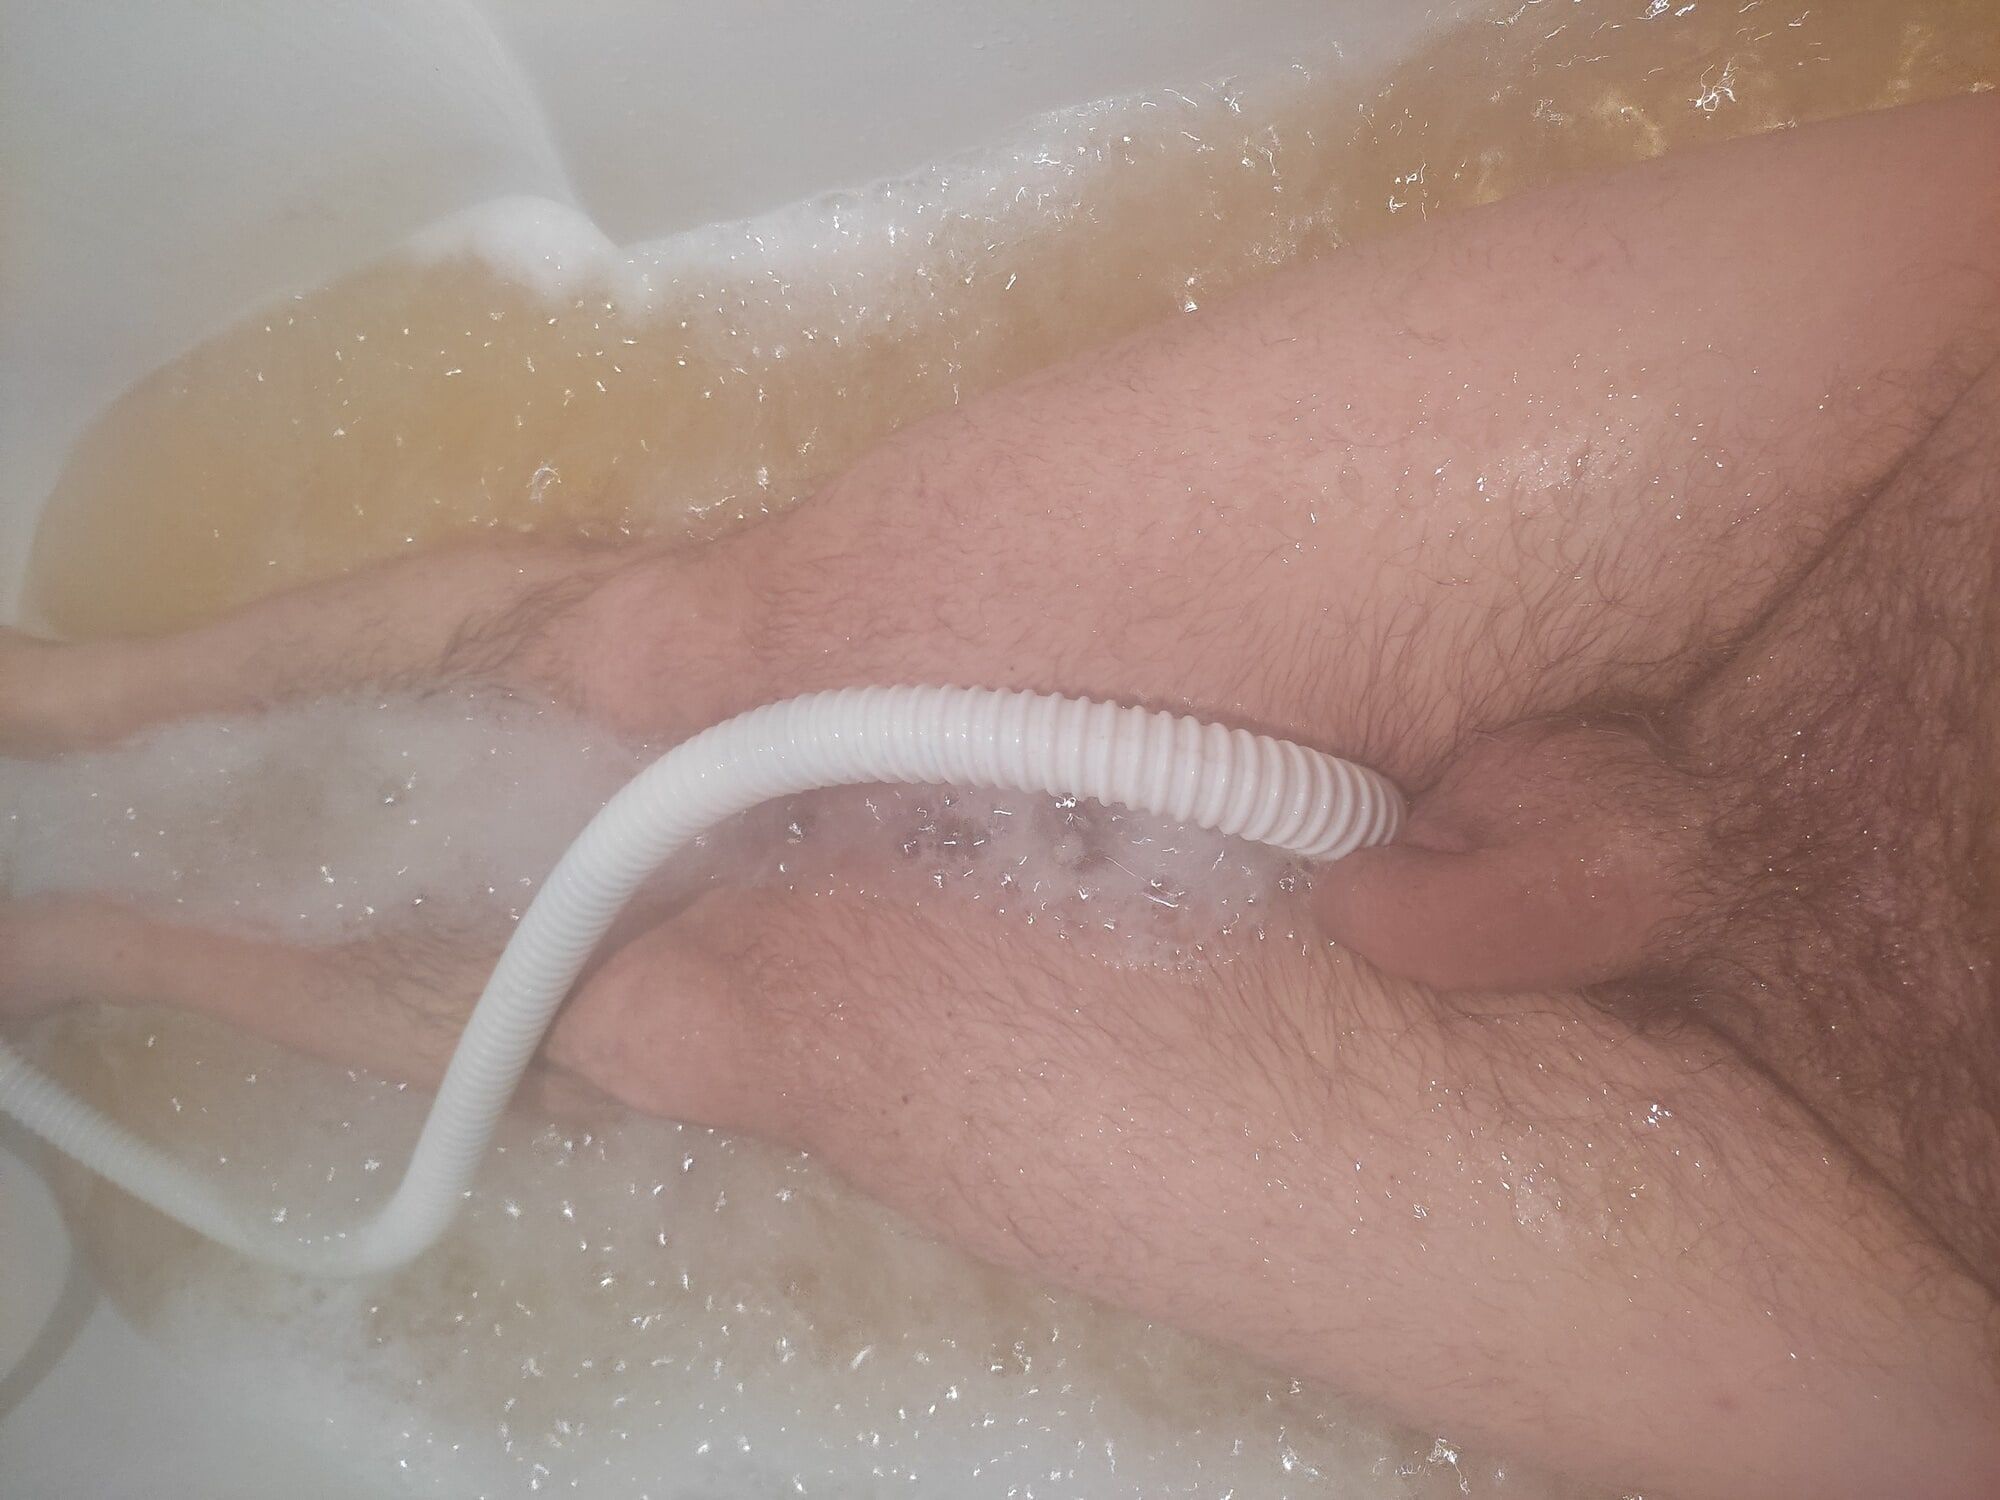 Male ass and cock in a bubblebath